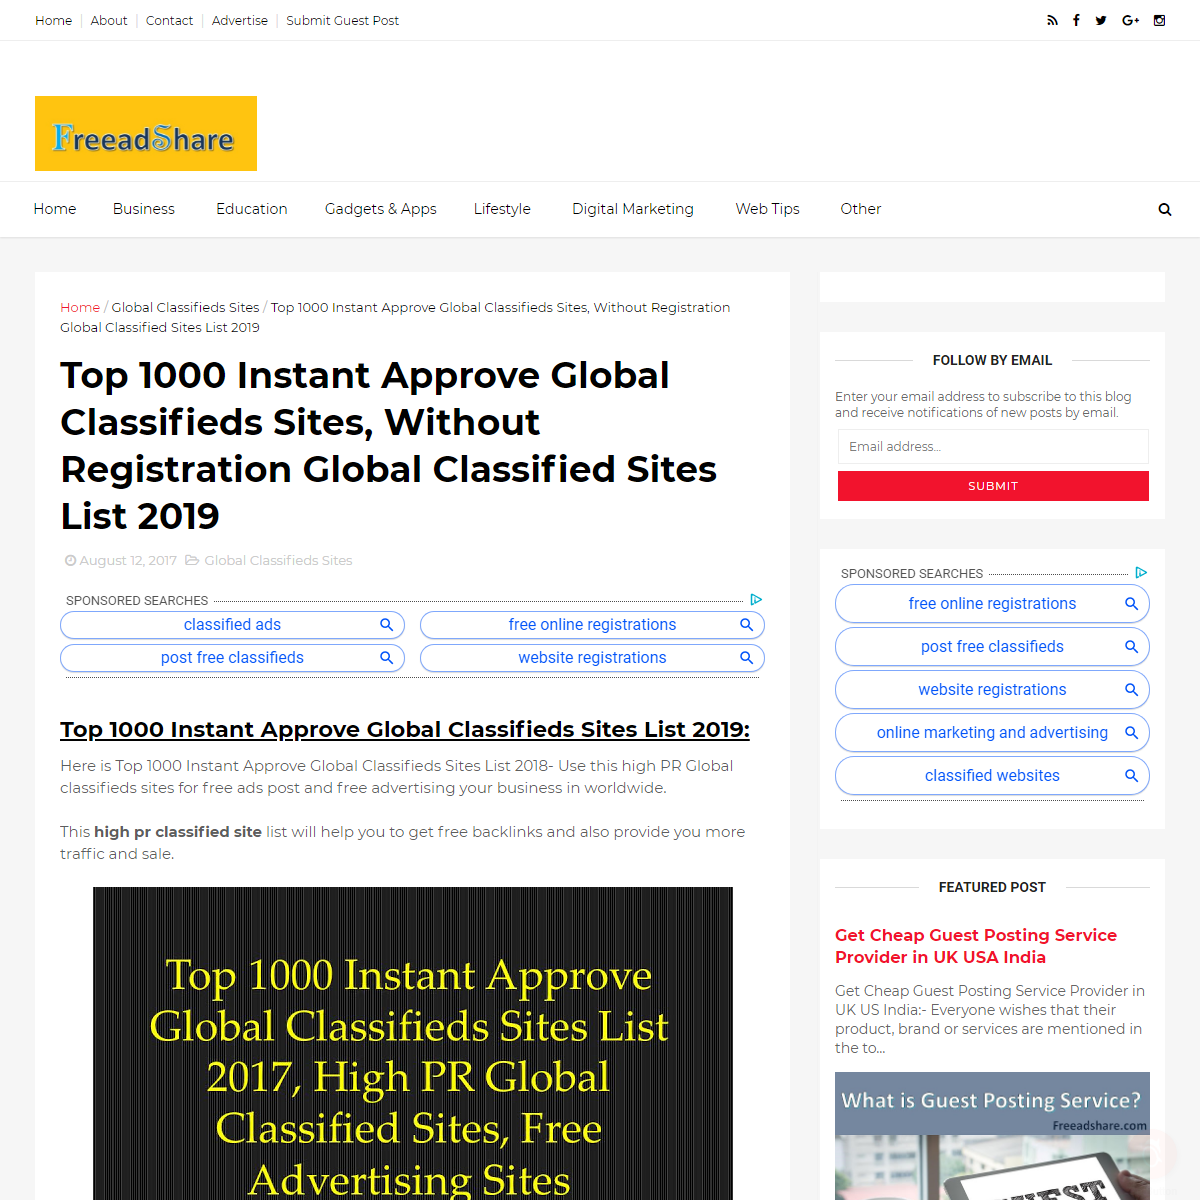 A complete backup of http://www.freeadshare.com/2017/08/top-1000-instant-approve-global.html